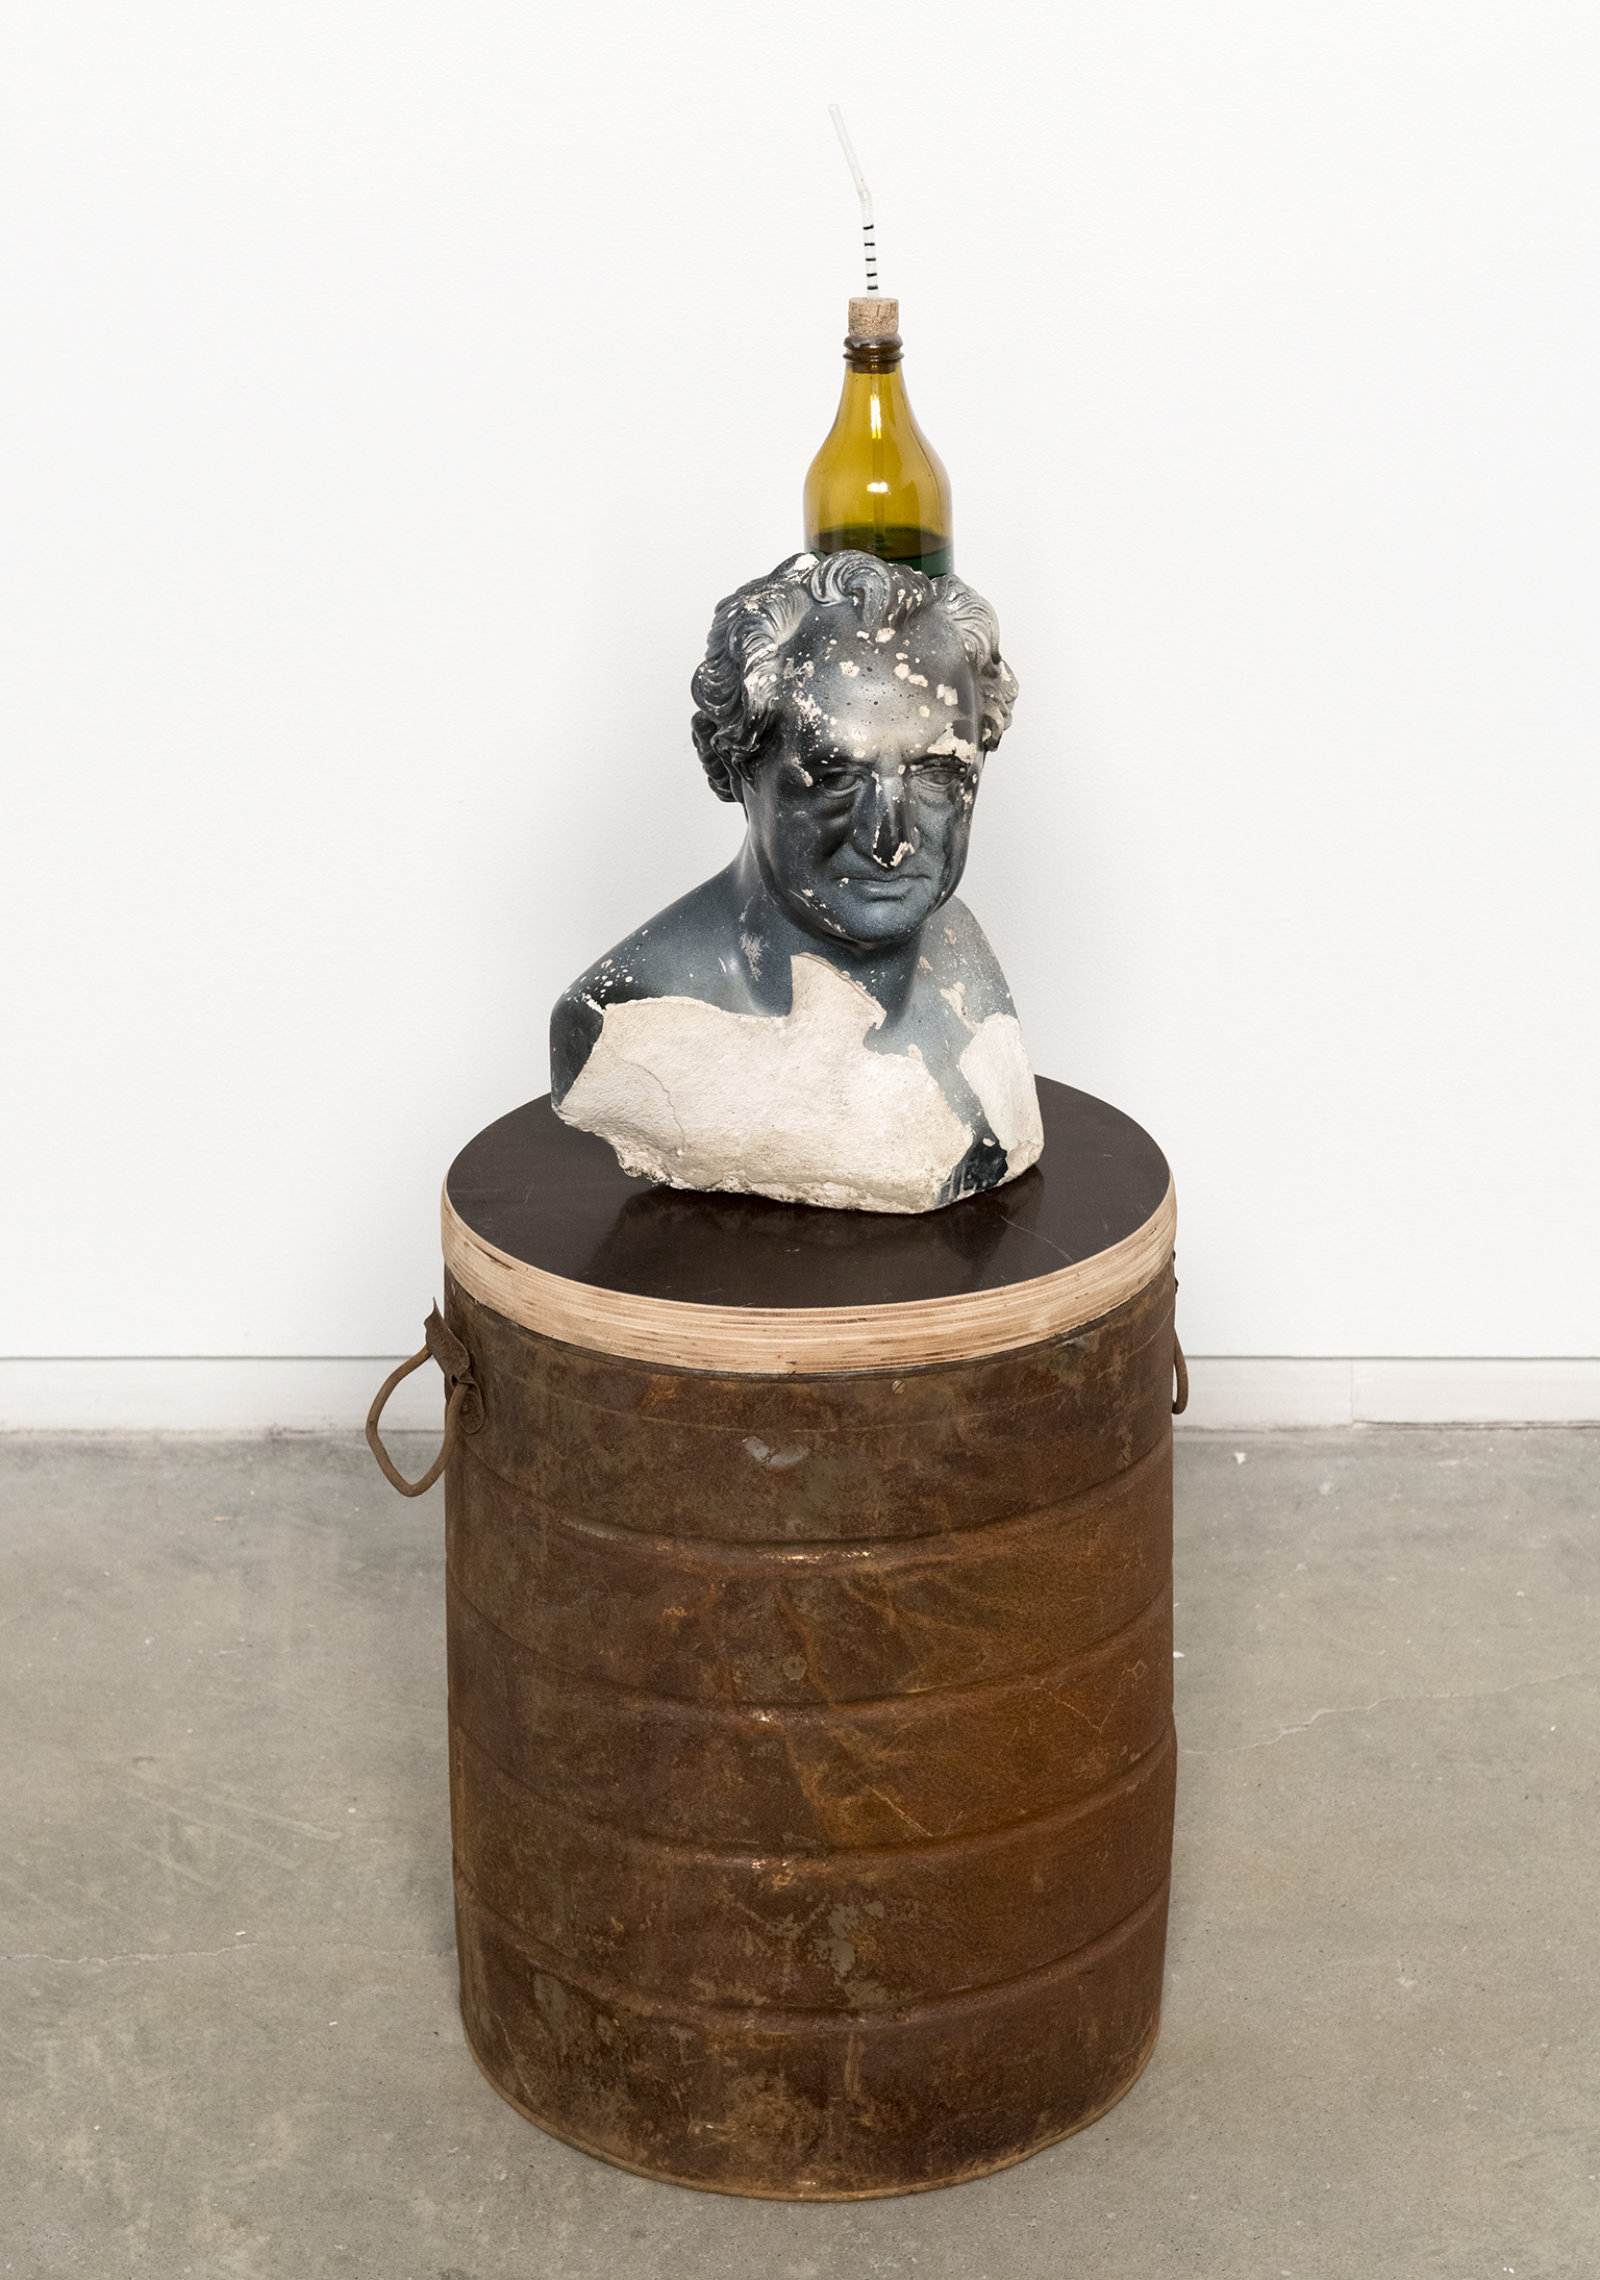 Ashes Withyman, Goethe Barometer from a place, near the buried canal, 2011–2012, bust found in trash, glass bottle, cork, drinking straw, coloured water, enamel paint, wood, metal, beeswax, 36 x 12 x 12 in. (91 x 30 x 30 cm)